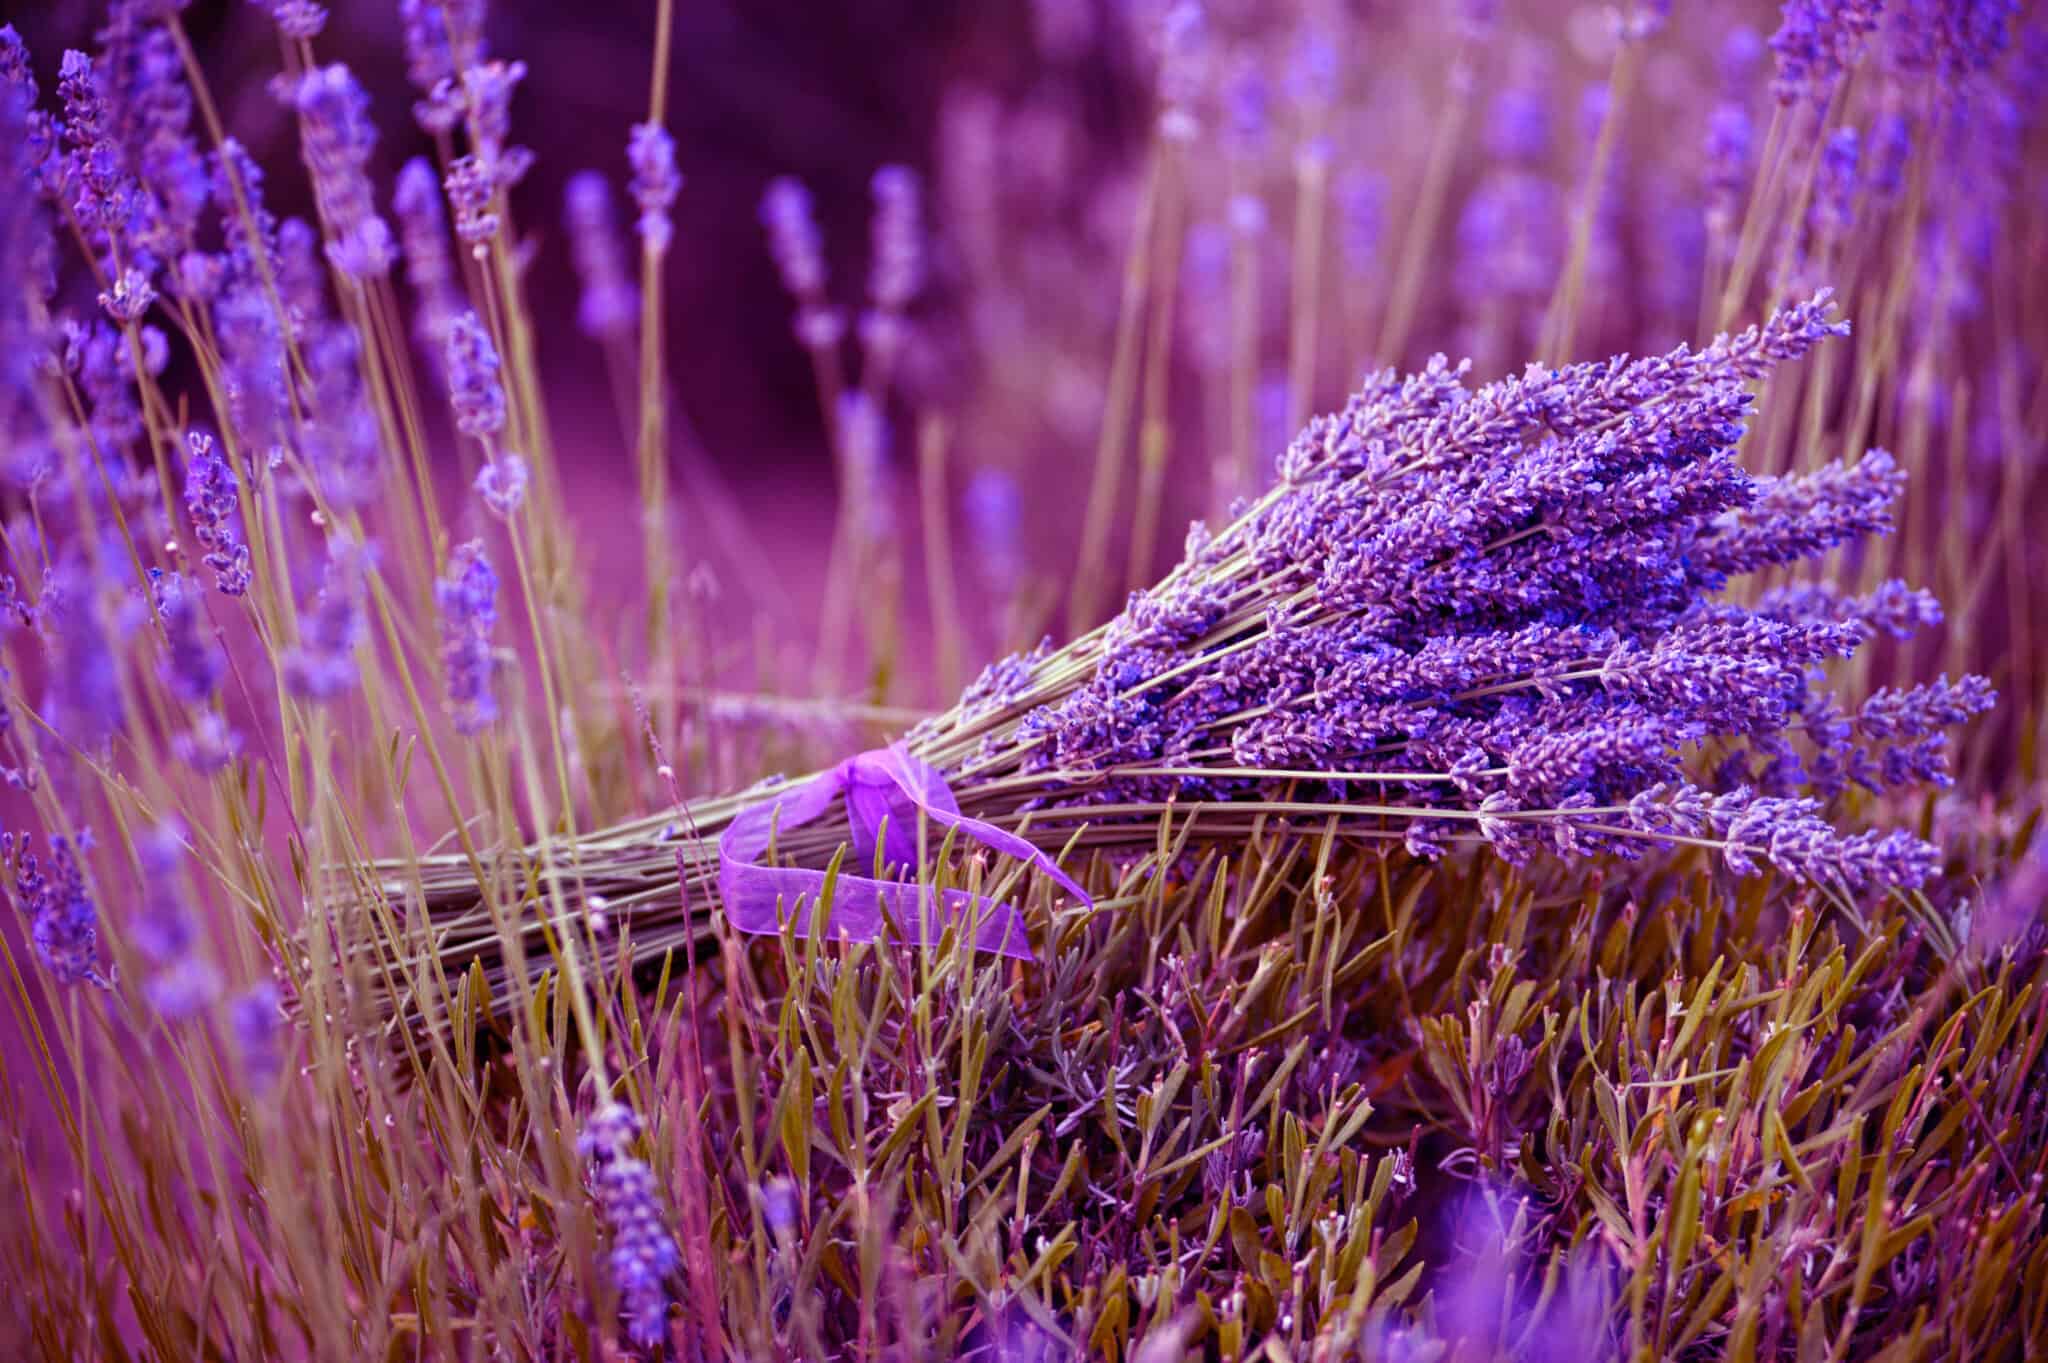 Hyssop vs. Lavender: What Are the Differences? - A-Z Animals